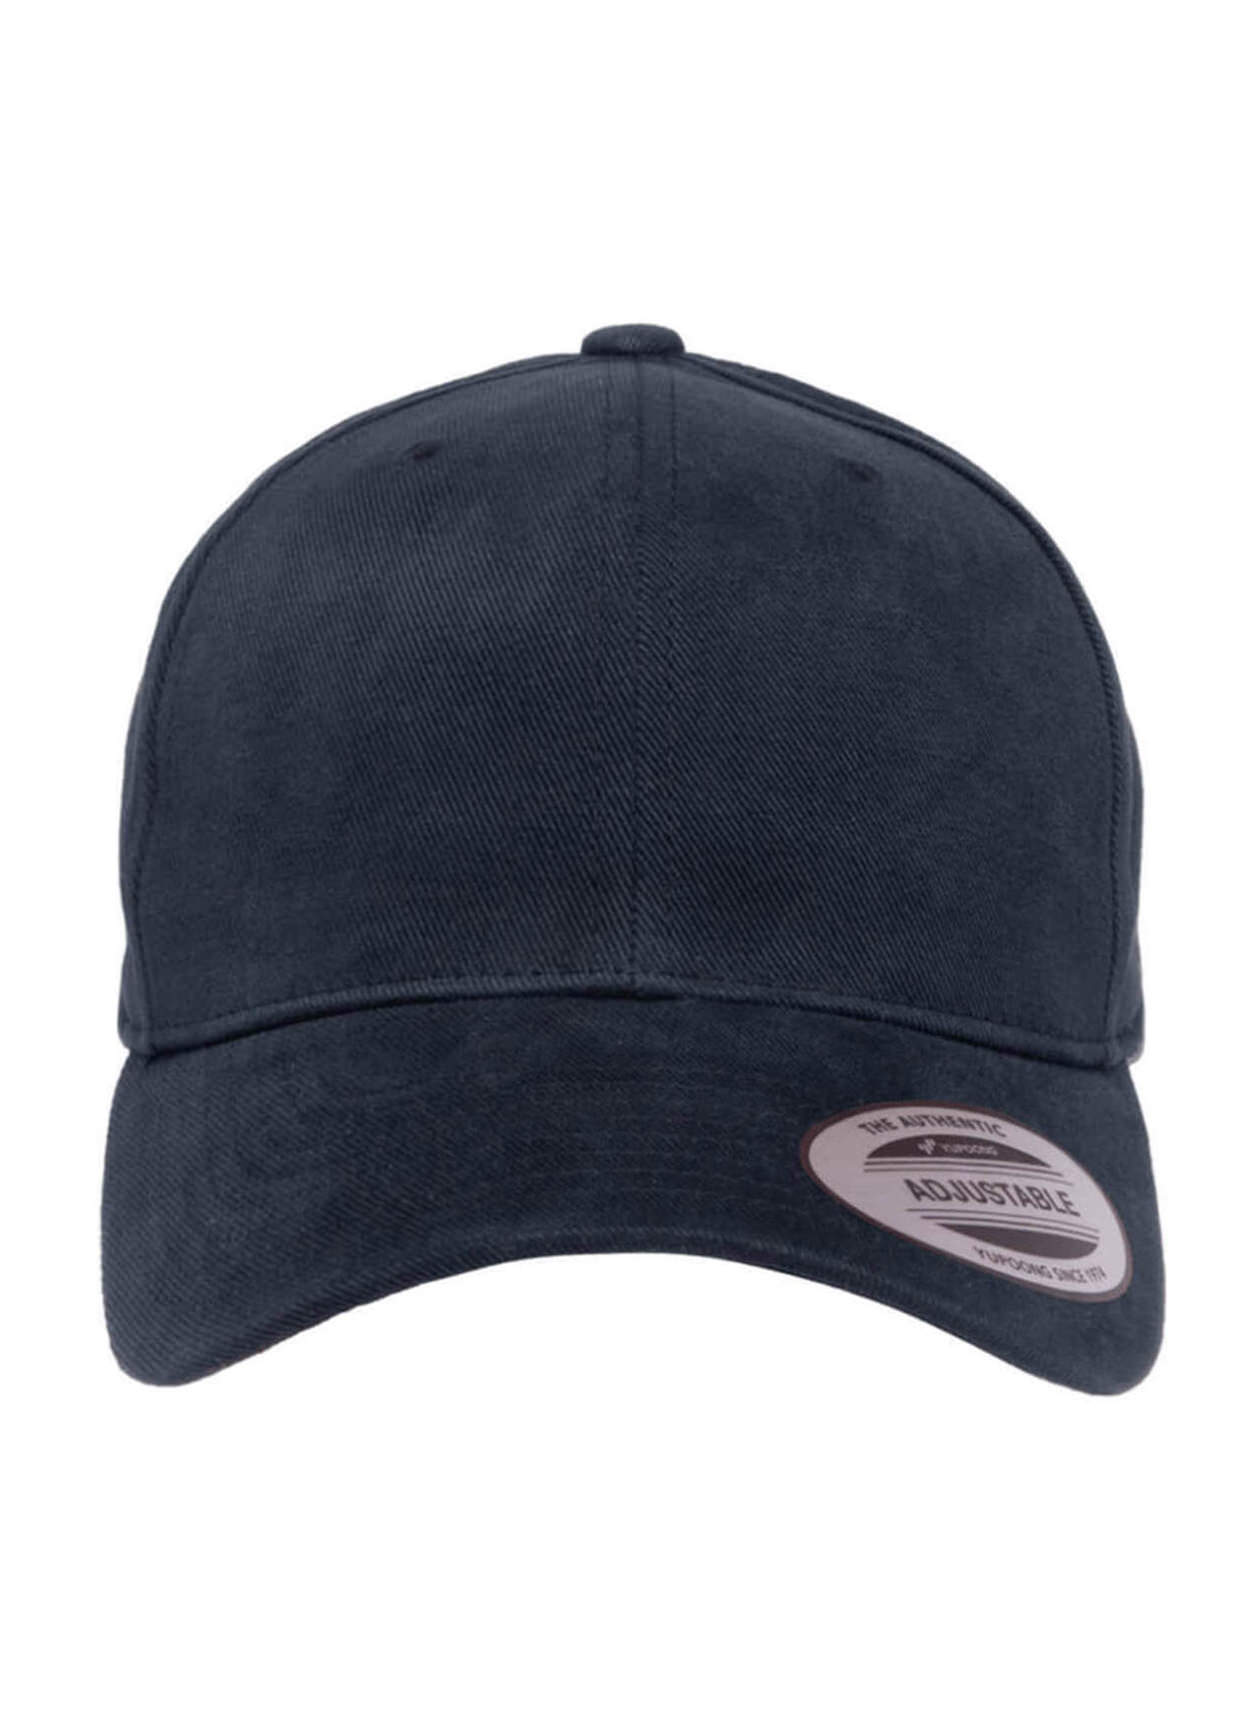 Yupoong Navy Brushed Cotton Twill Mid-Profile Hat